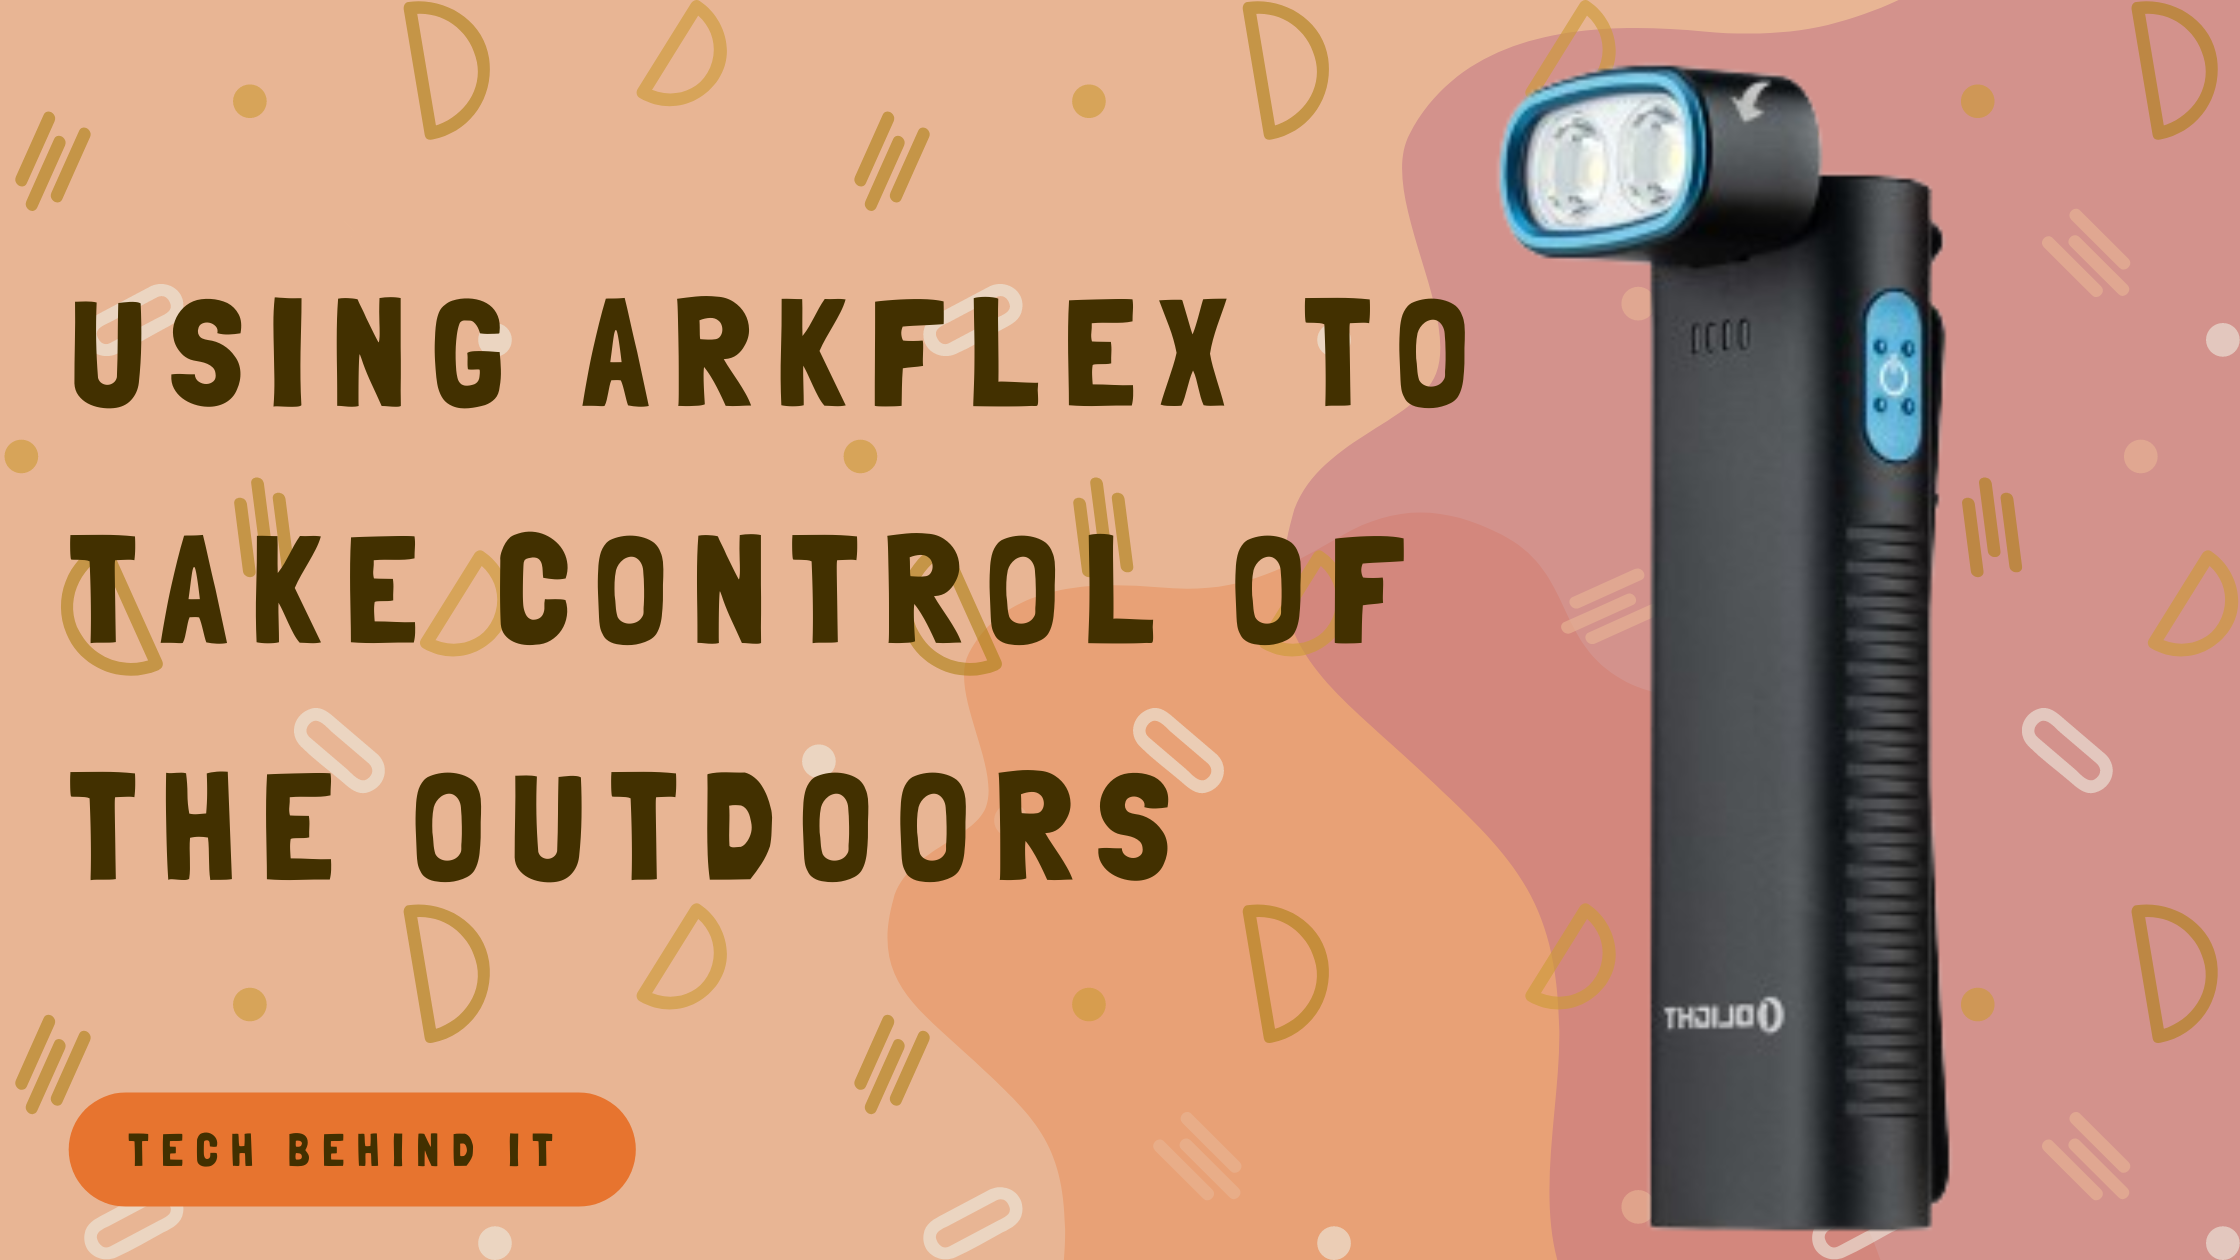 Using Arkflex to Take Control of the Outdoors: An Adaptable Lighting Option